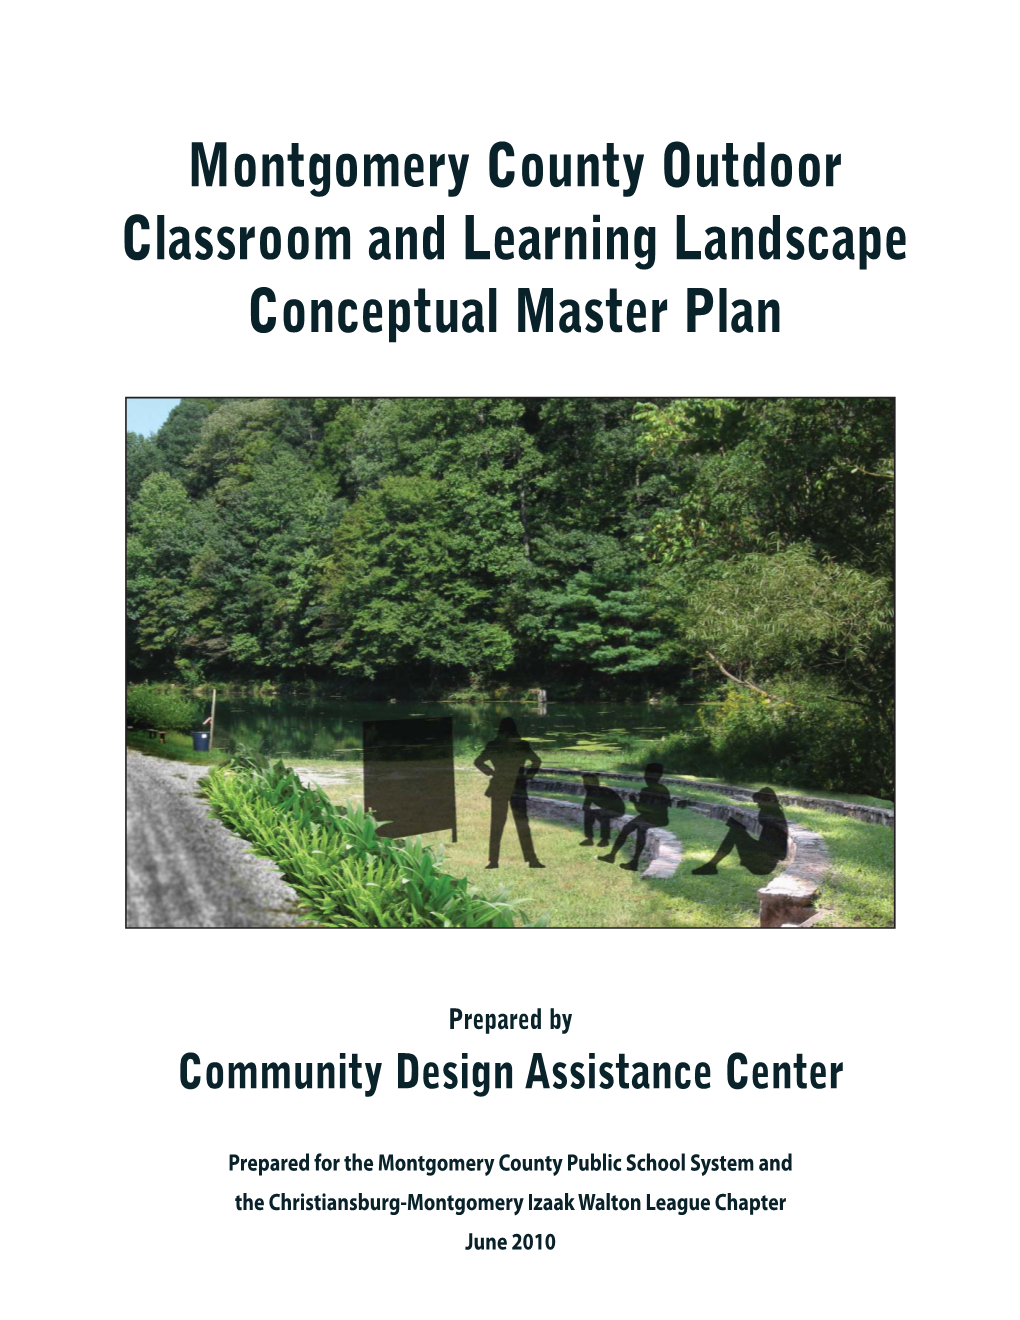 Montgomery County Outdoor Classroom and Learning Landscape Conceptual Master Plan